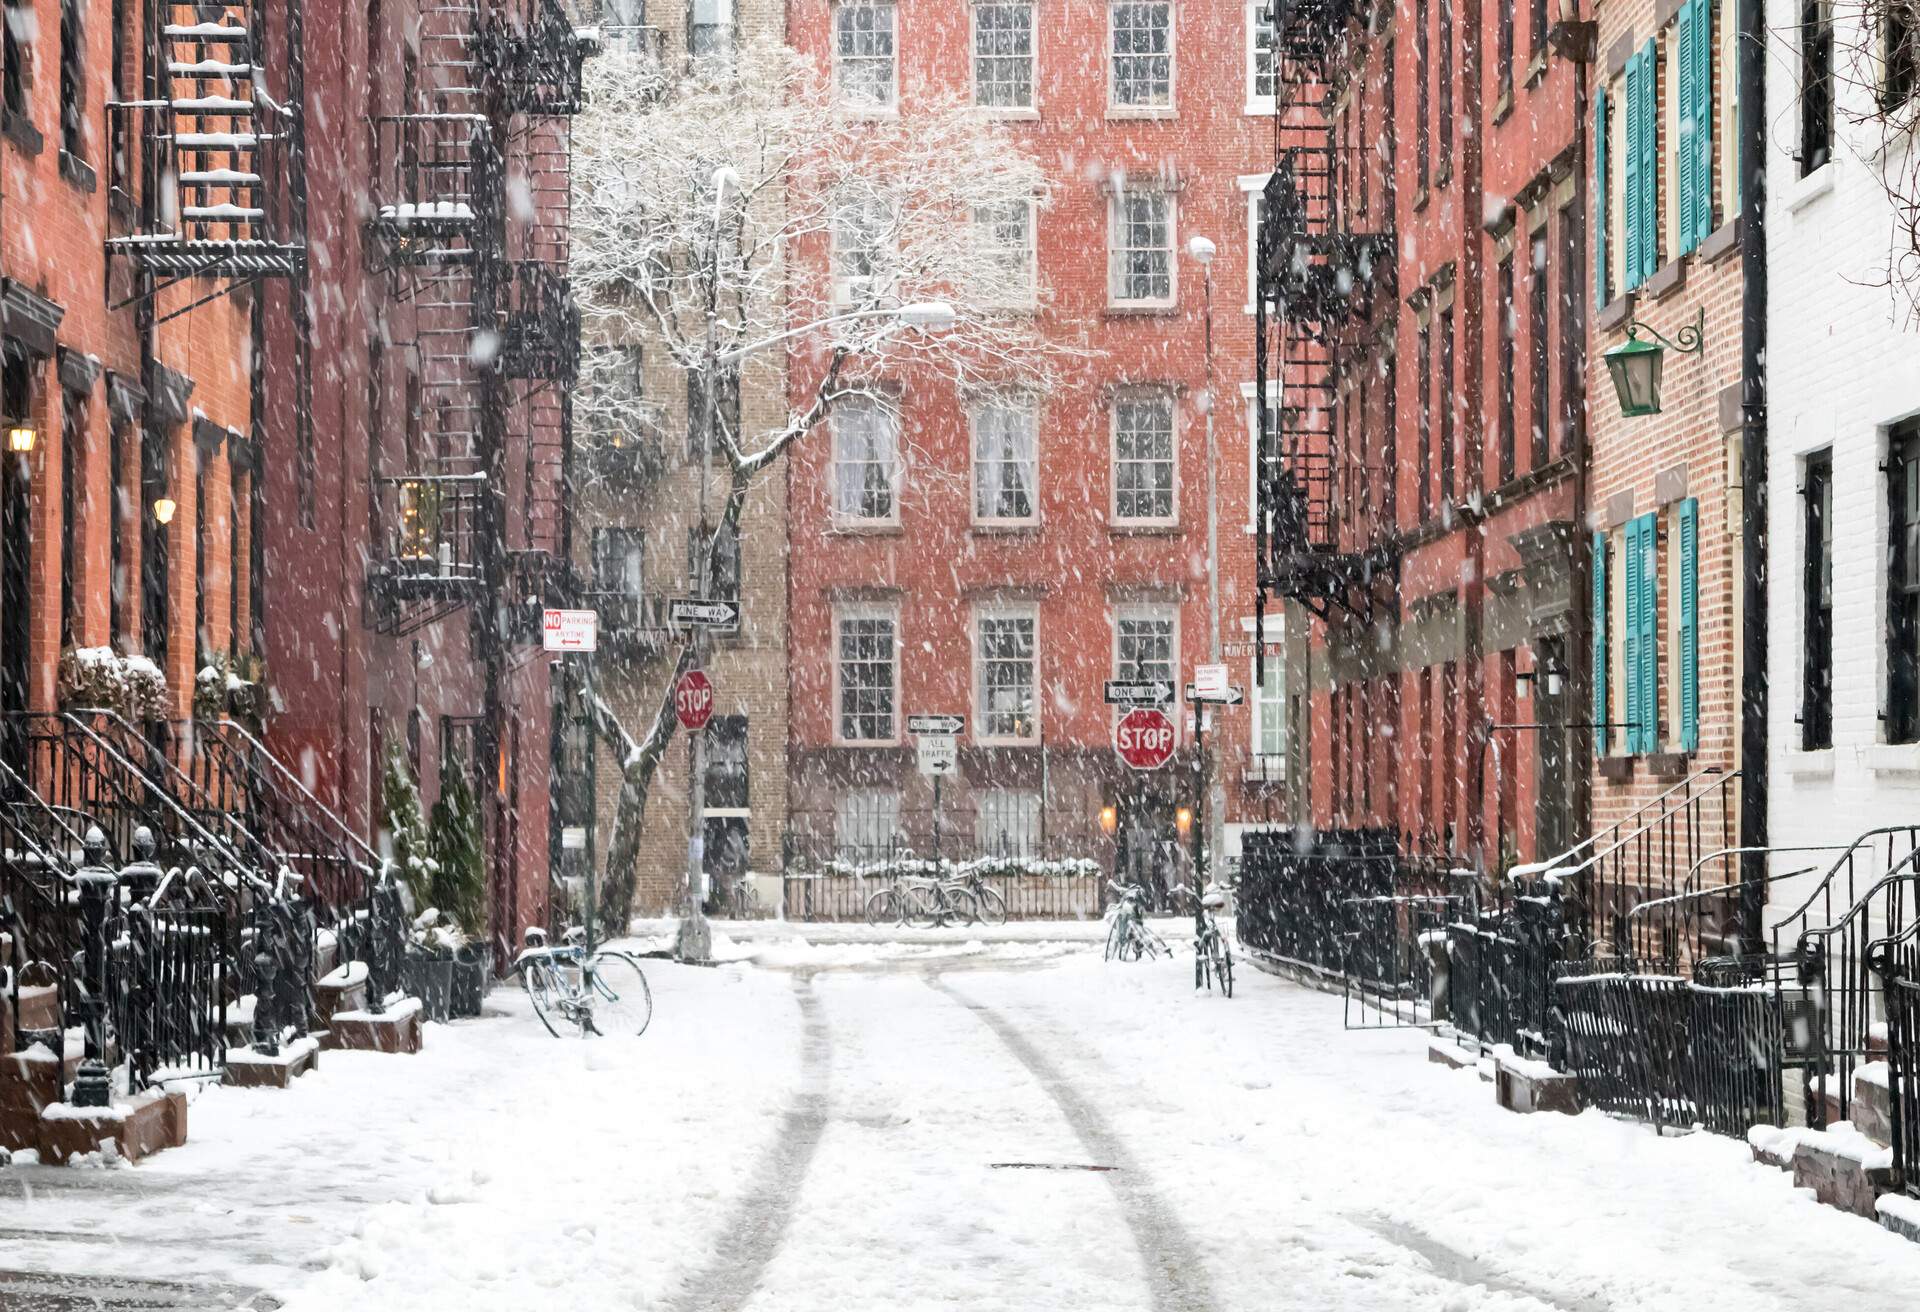 Tire prints on a snow path bordered by adjacent colourful brick buildings during a snowfall.